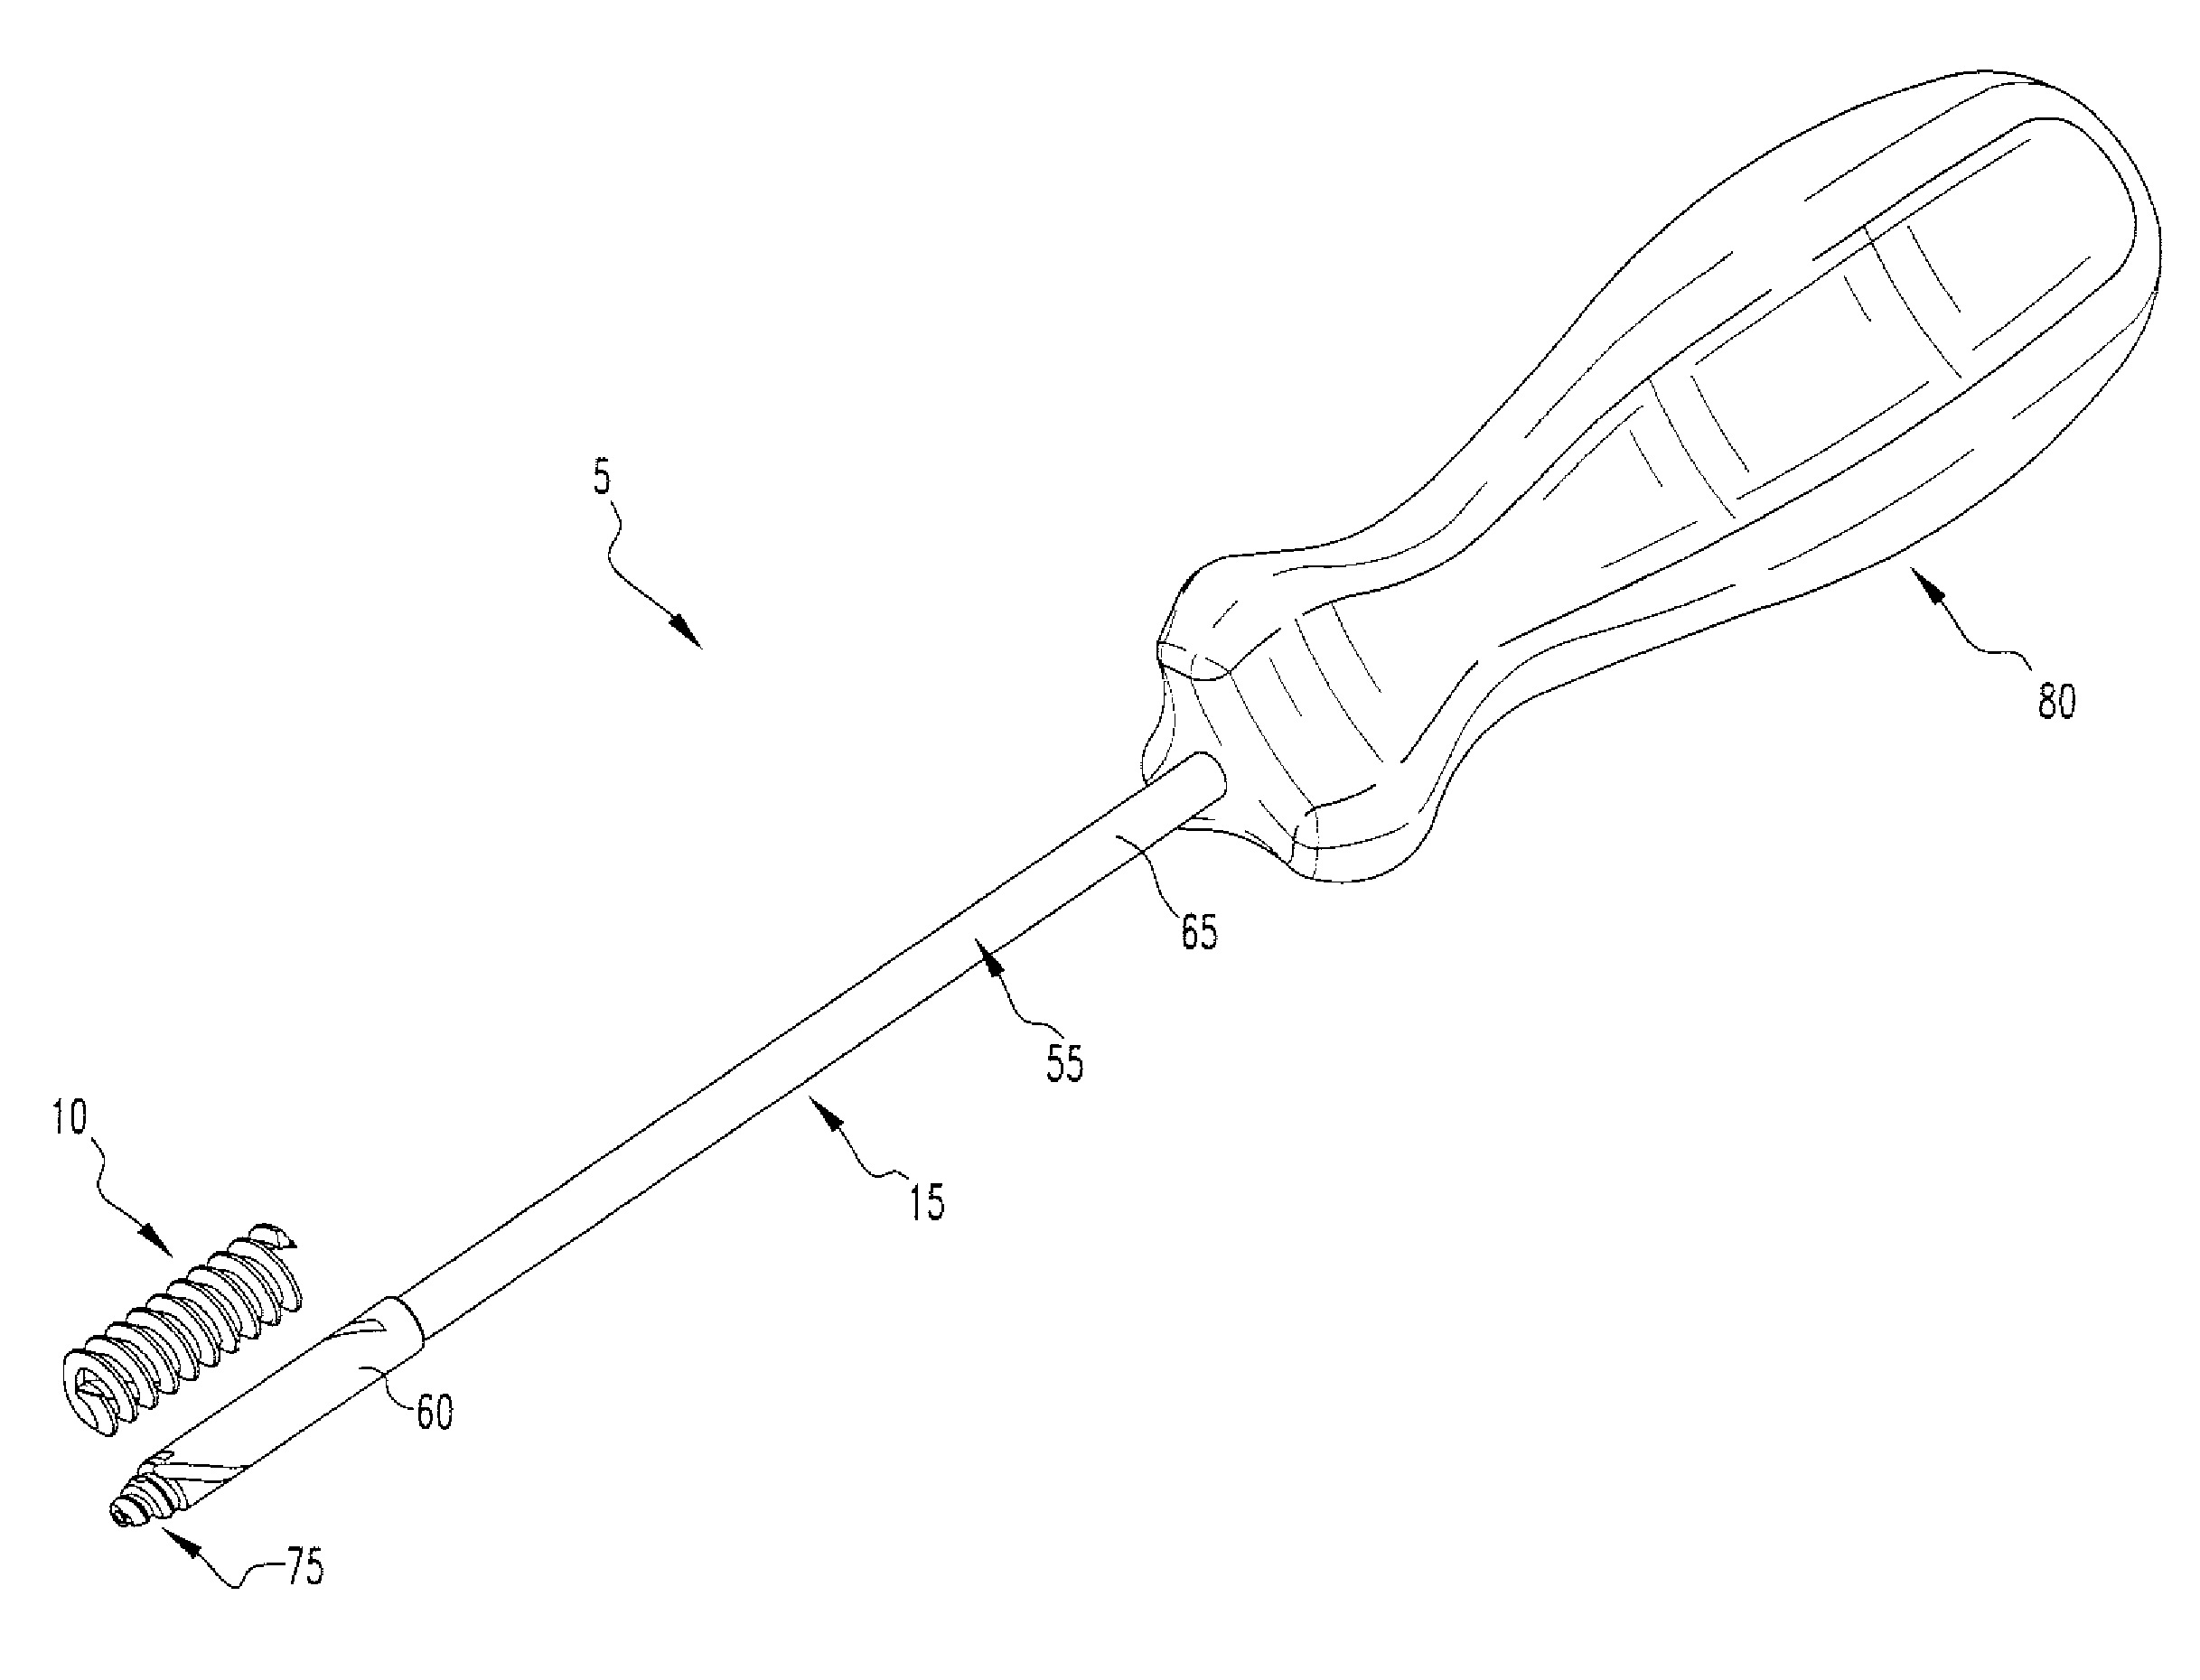 Helicoil interference fixation system for attaching a graft ligament to a bone